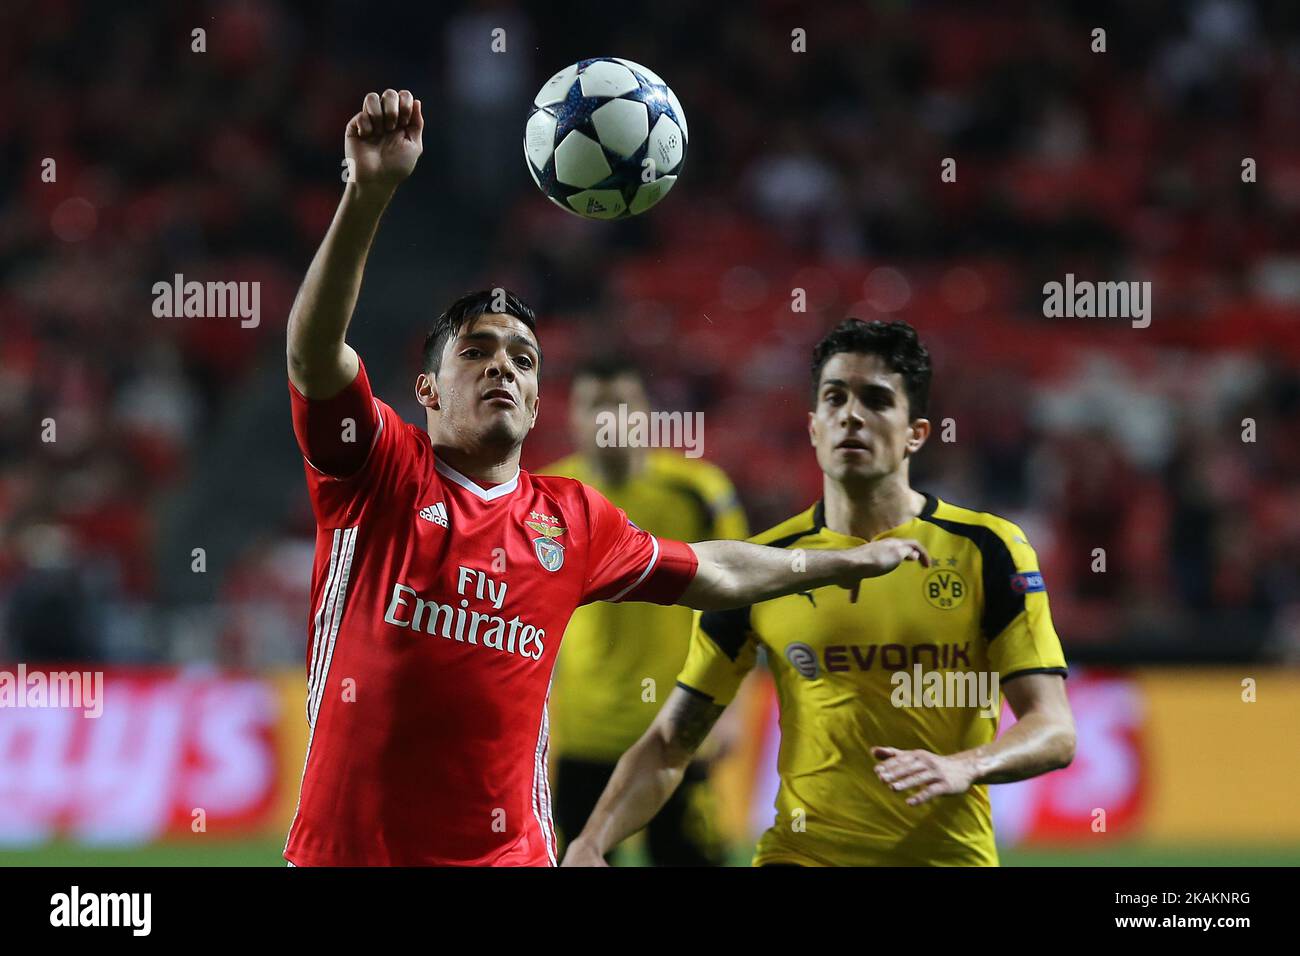 Benficas forward Raul Jimenez from Mexico during the SL Benfica v Borussia Dortmund - UEFA Champions League16 Final match at Estadio da Luz on February 14, 2017 in Lisbon, Portugal.(Photo by Bruno Barros / DPI / NurPhoto) *** Please Use Credit from Credit Field *** Stock Photo